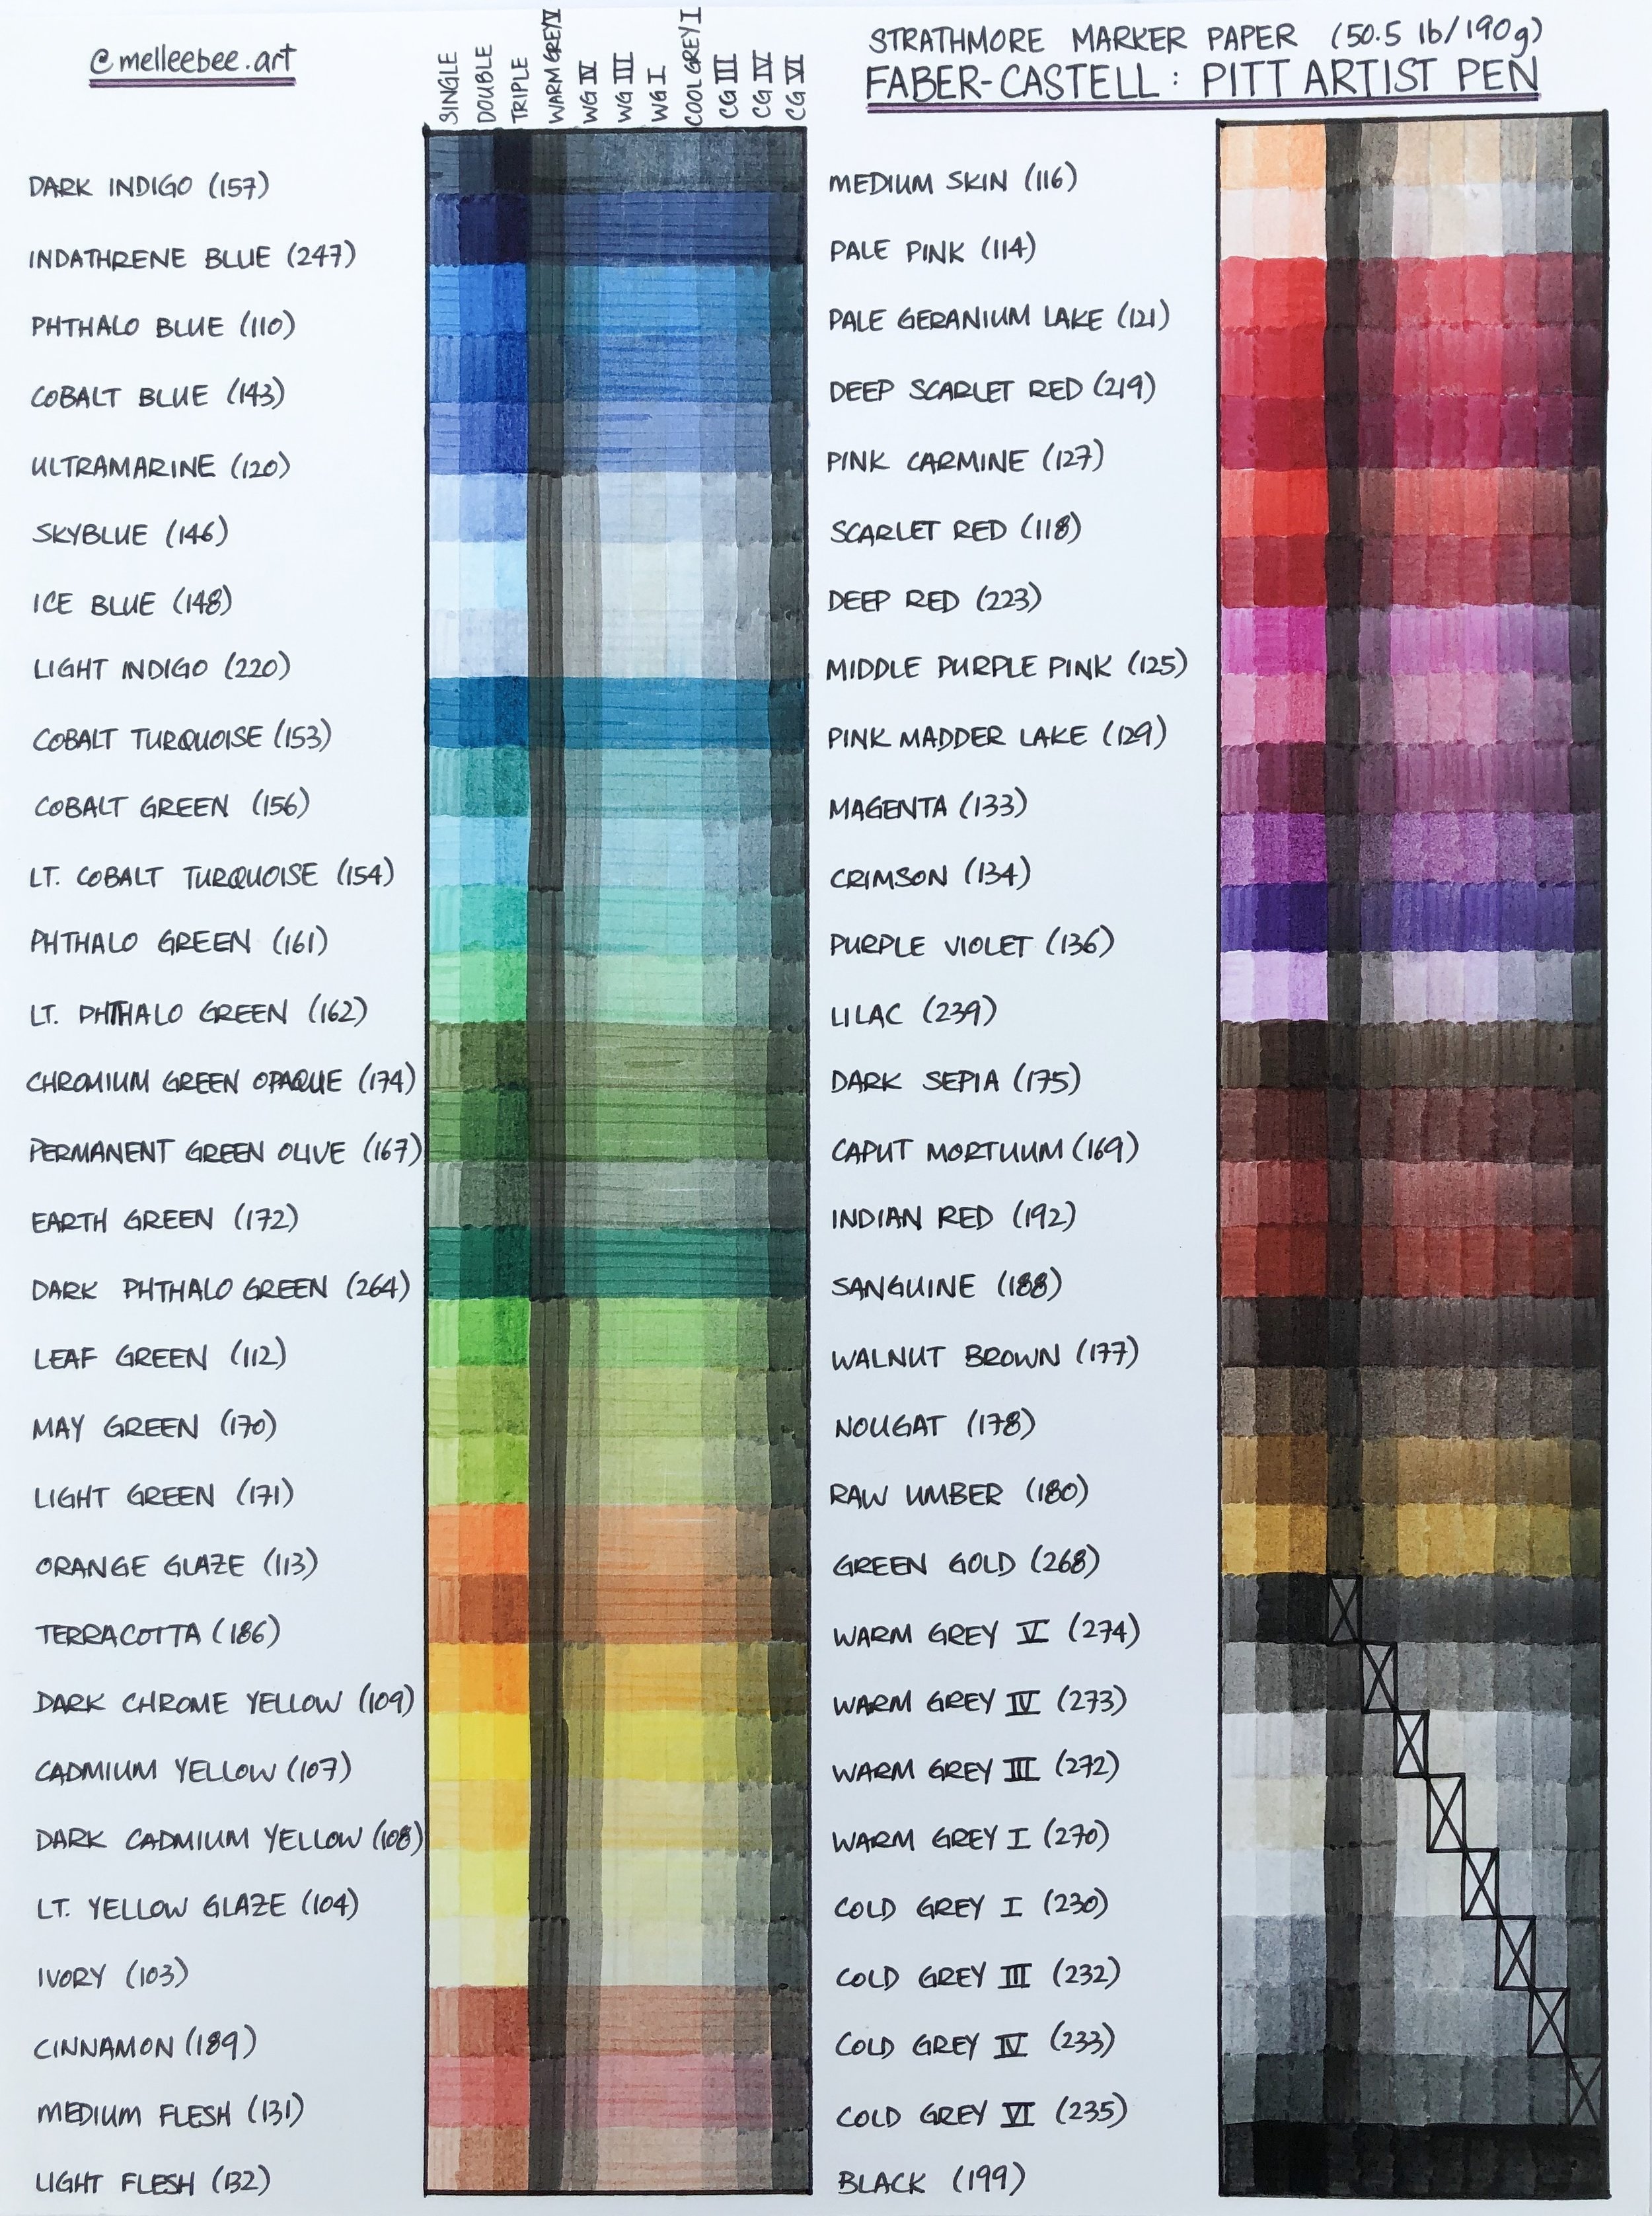 Faber Castell Polychromos 60 Color Chart